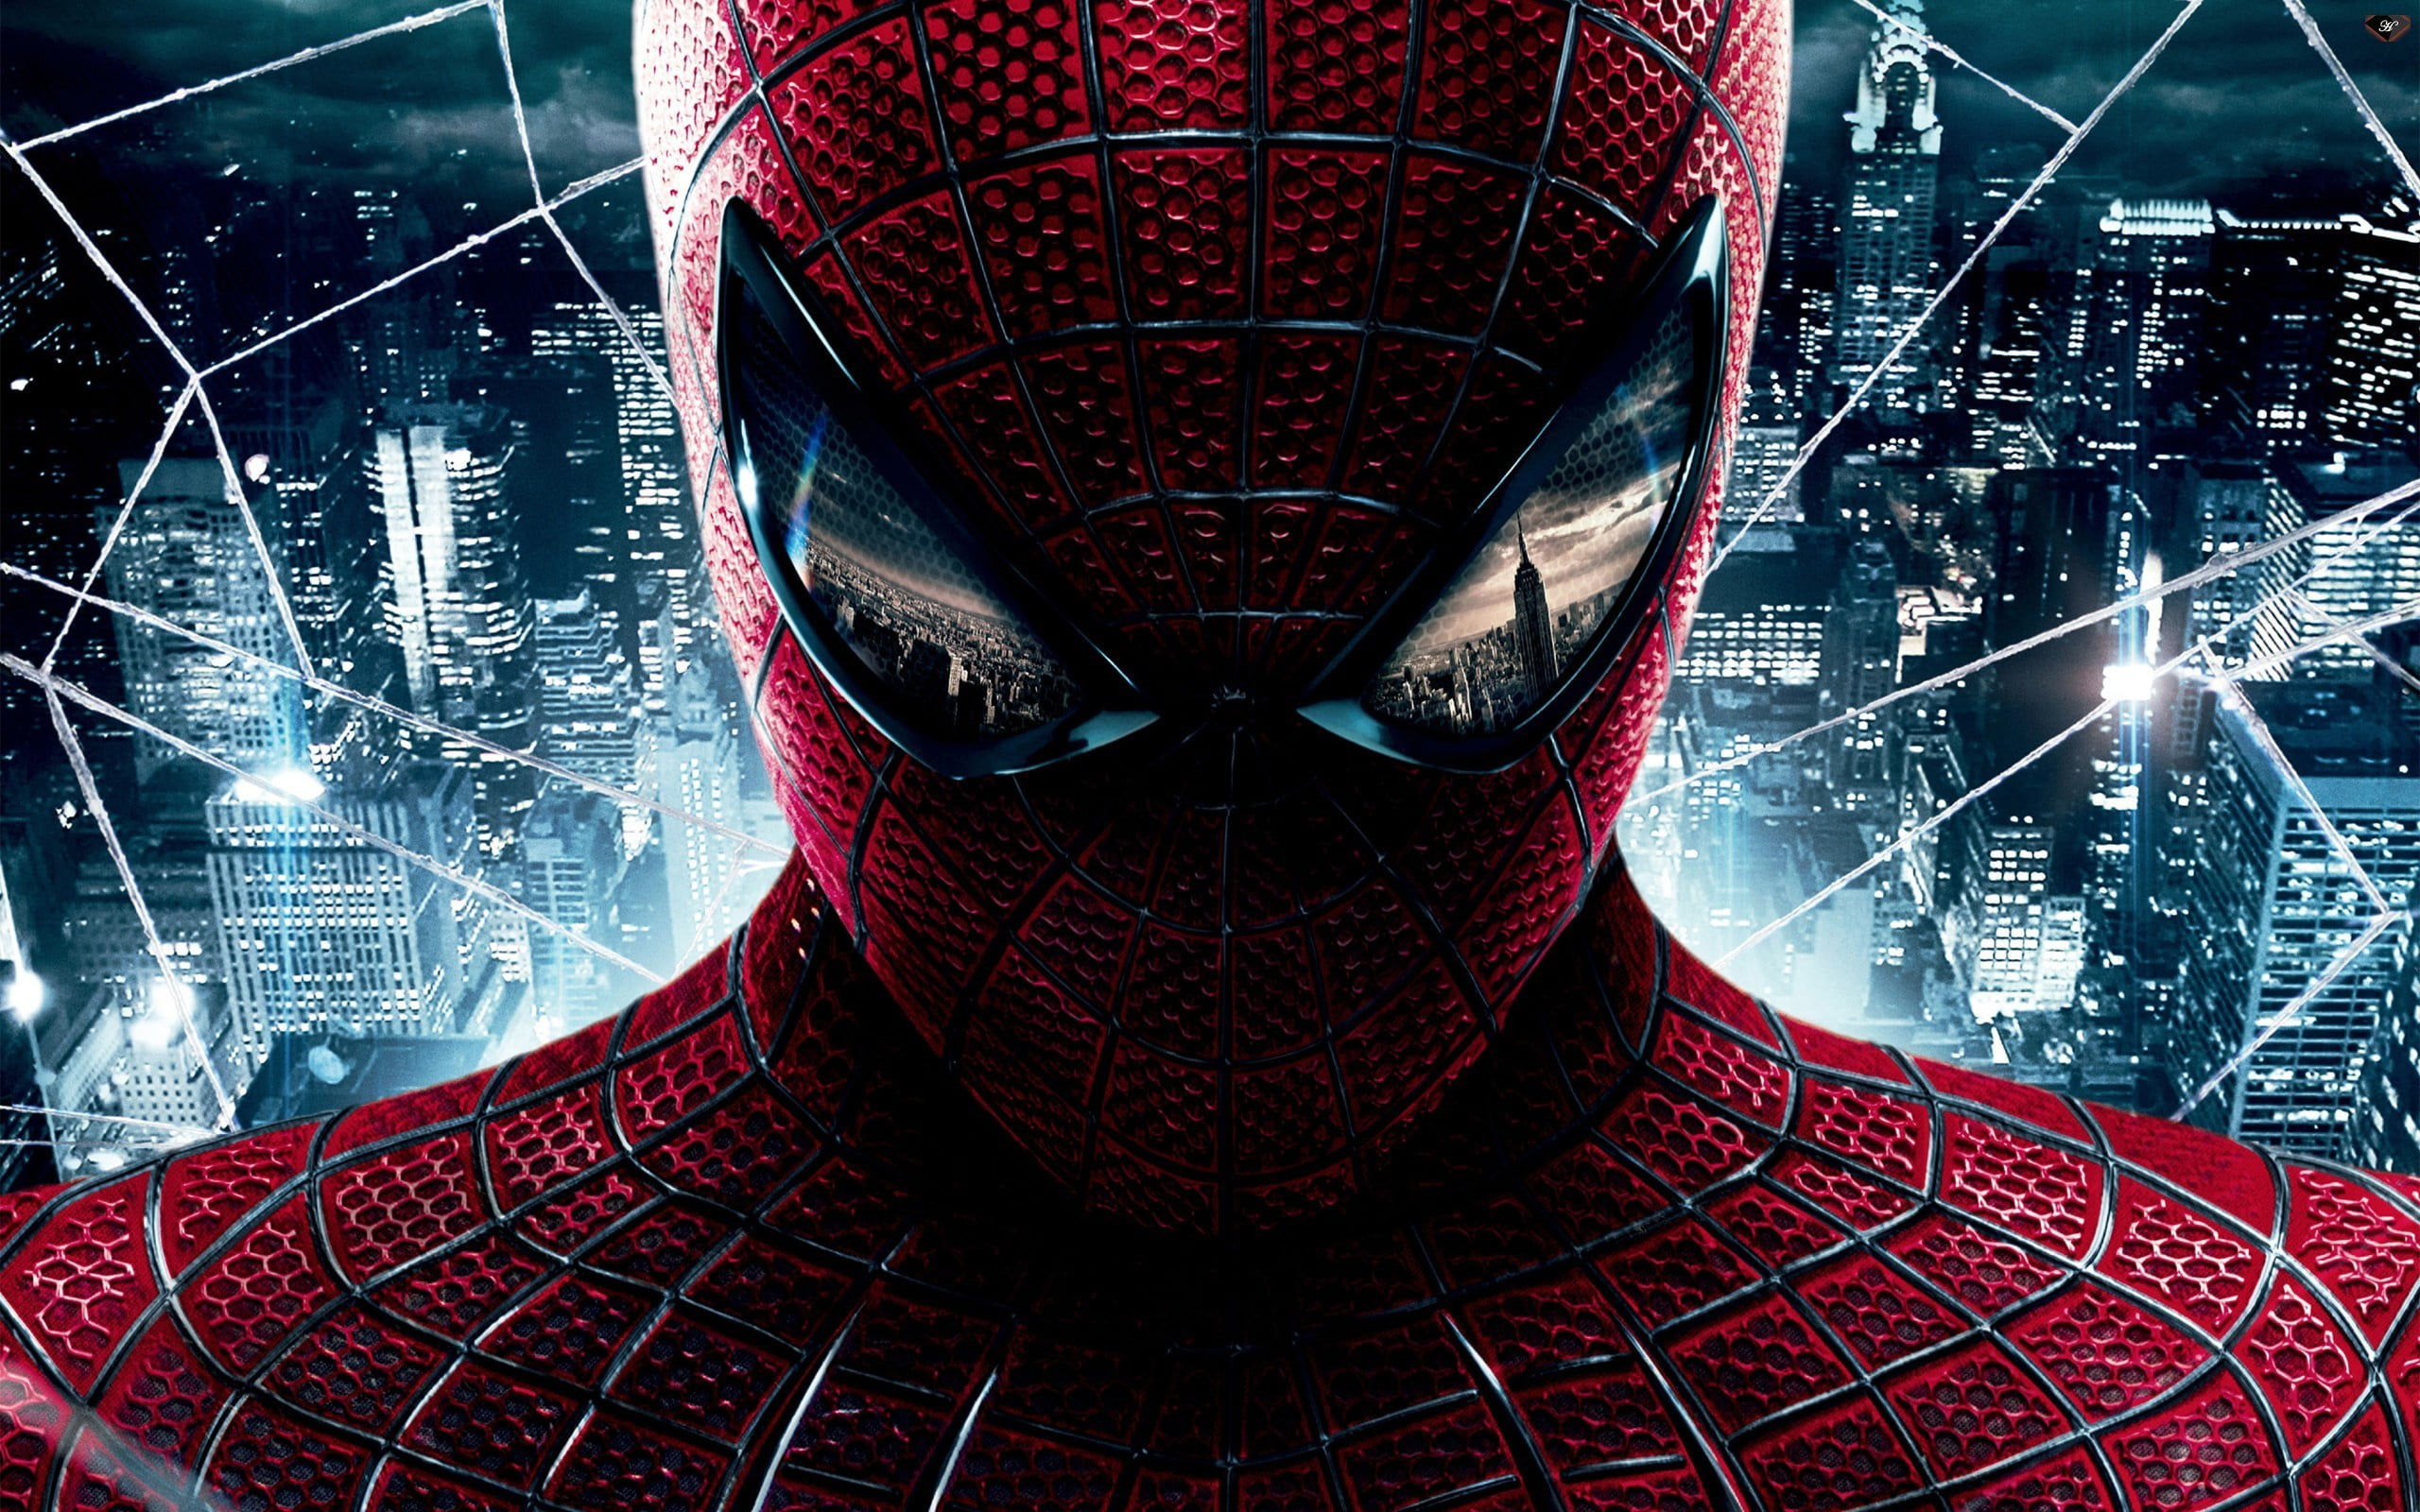 Marvel The Amazing Spider-Man digital wallpaper, red, one person